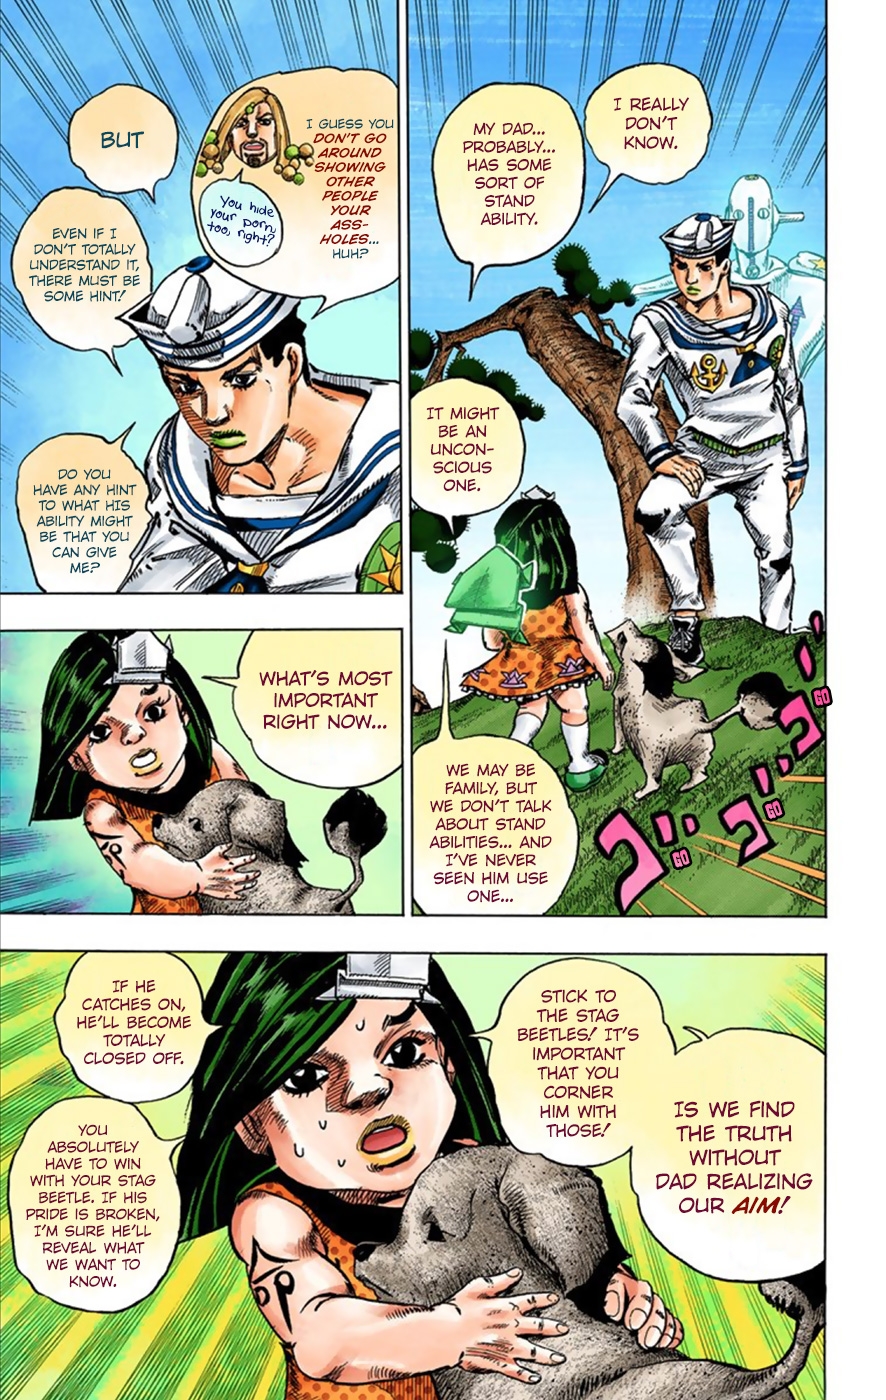 JoJo's Bizarre Adventure Part 8 JoJolion (Official Colored) Vol. 9 Ch. 35 Every Day is a Summer Vacation Part 2